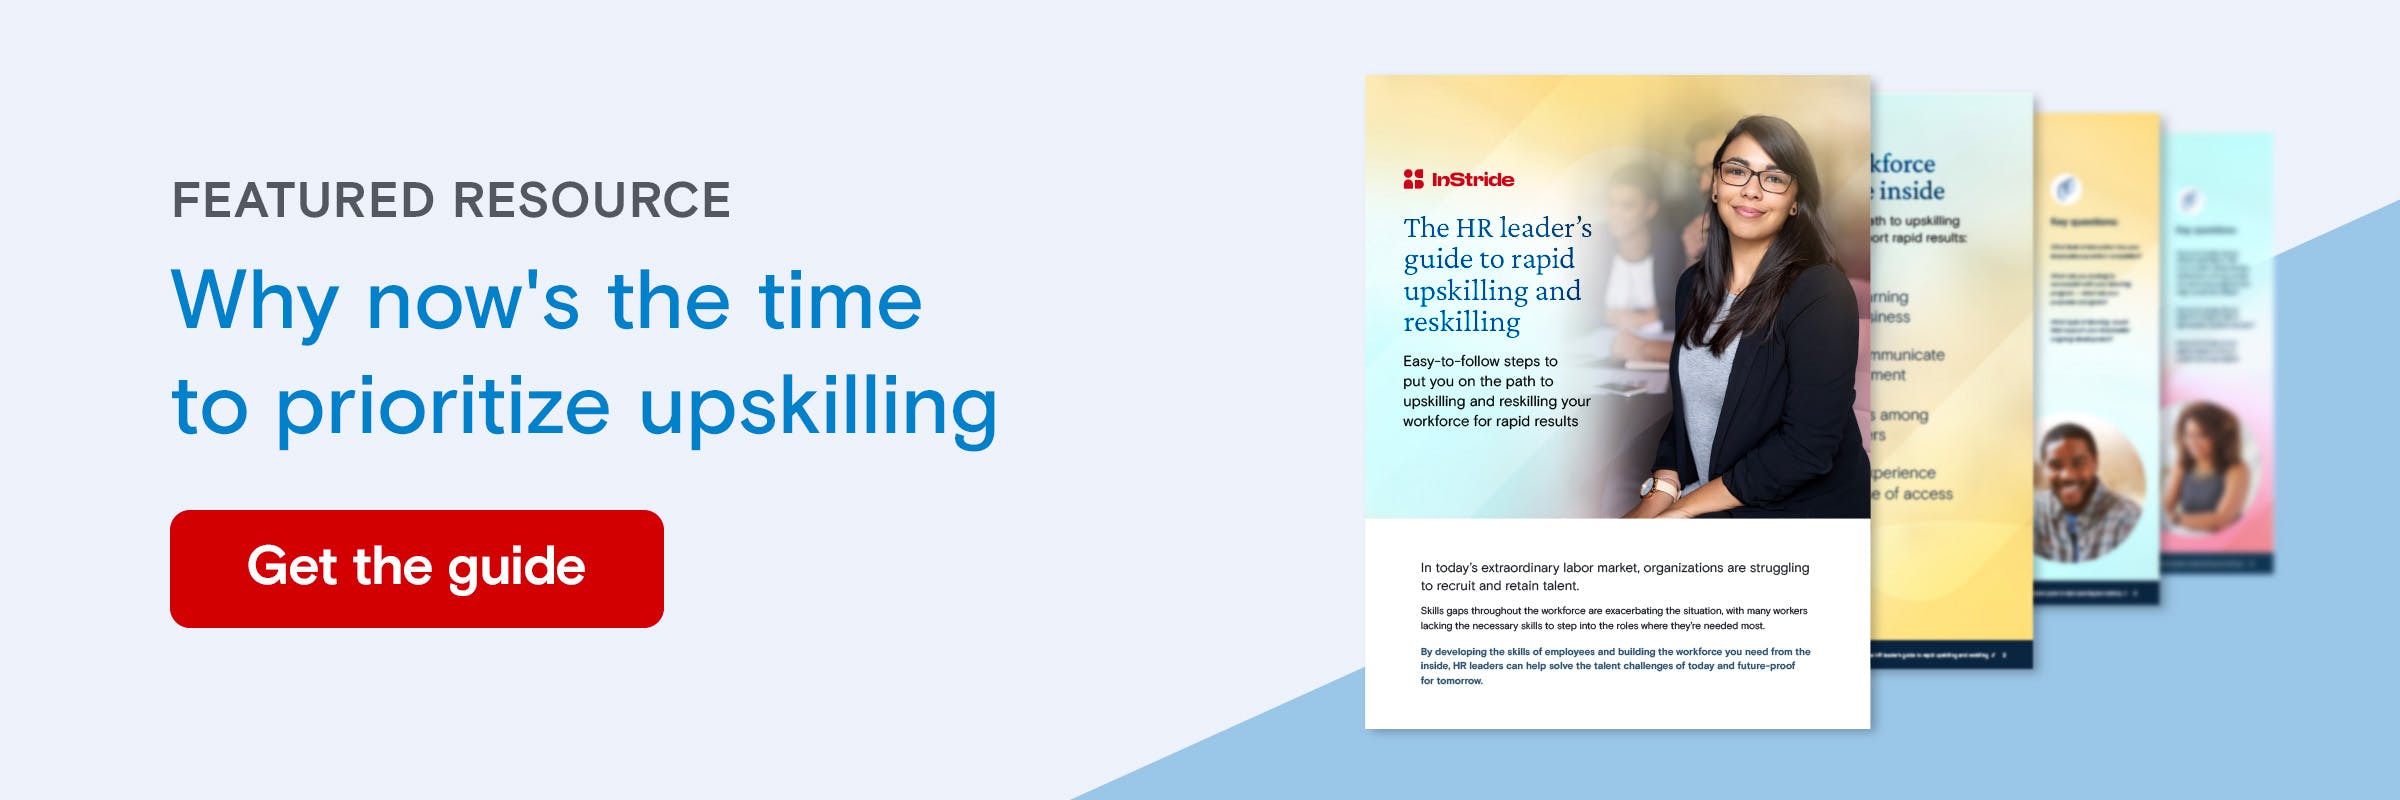 banner promoting an employee skill-building guide for HR leaders